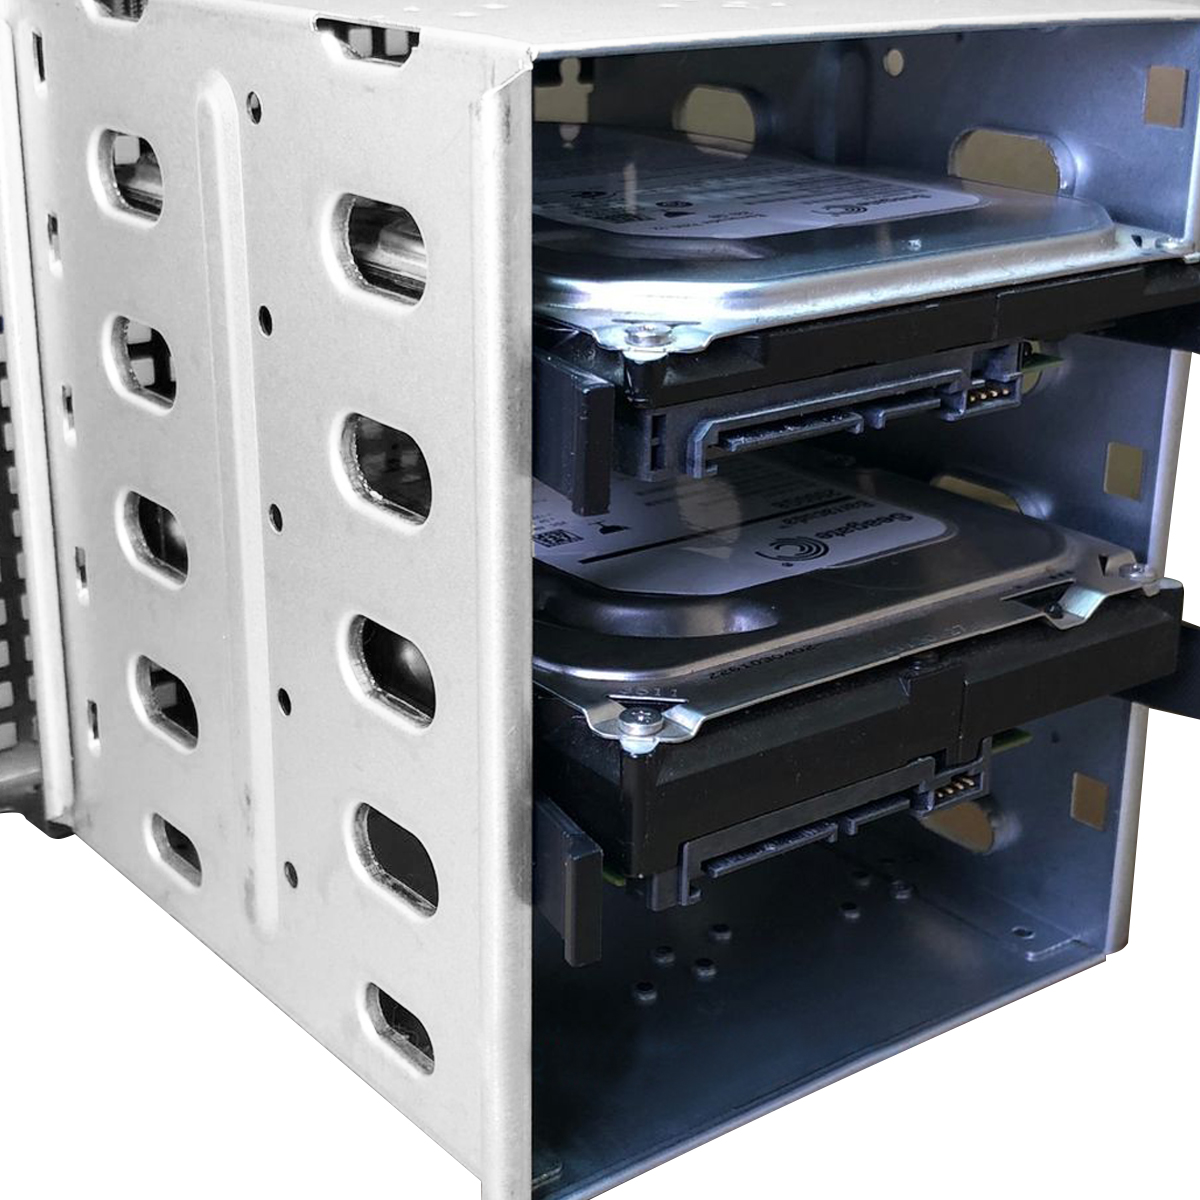 5.25" to 5x 3.5" SATA SAS HDD Cage Rack Hard Drive Tray Caddy Converter with Fan Space 47